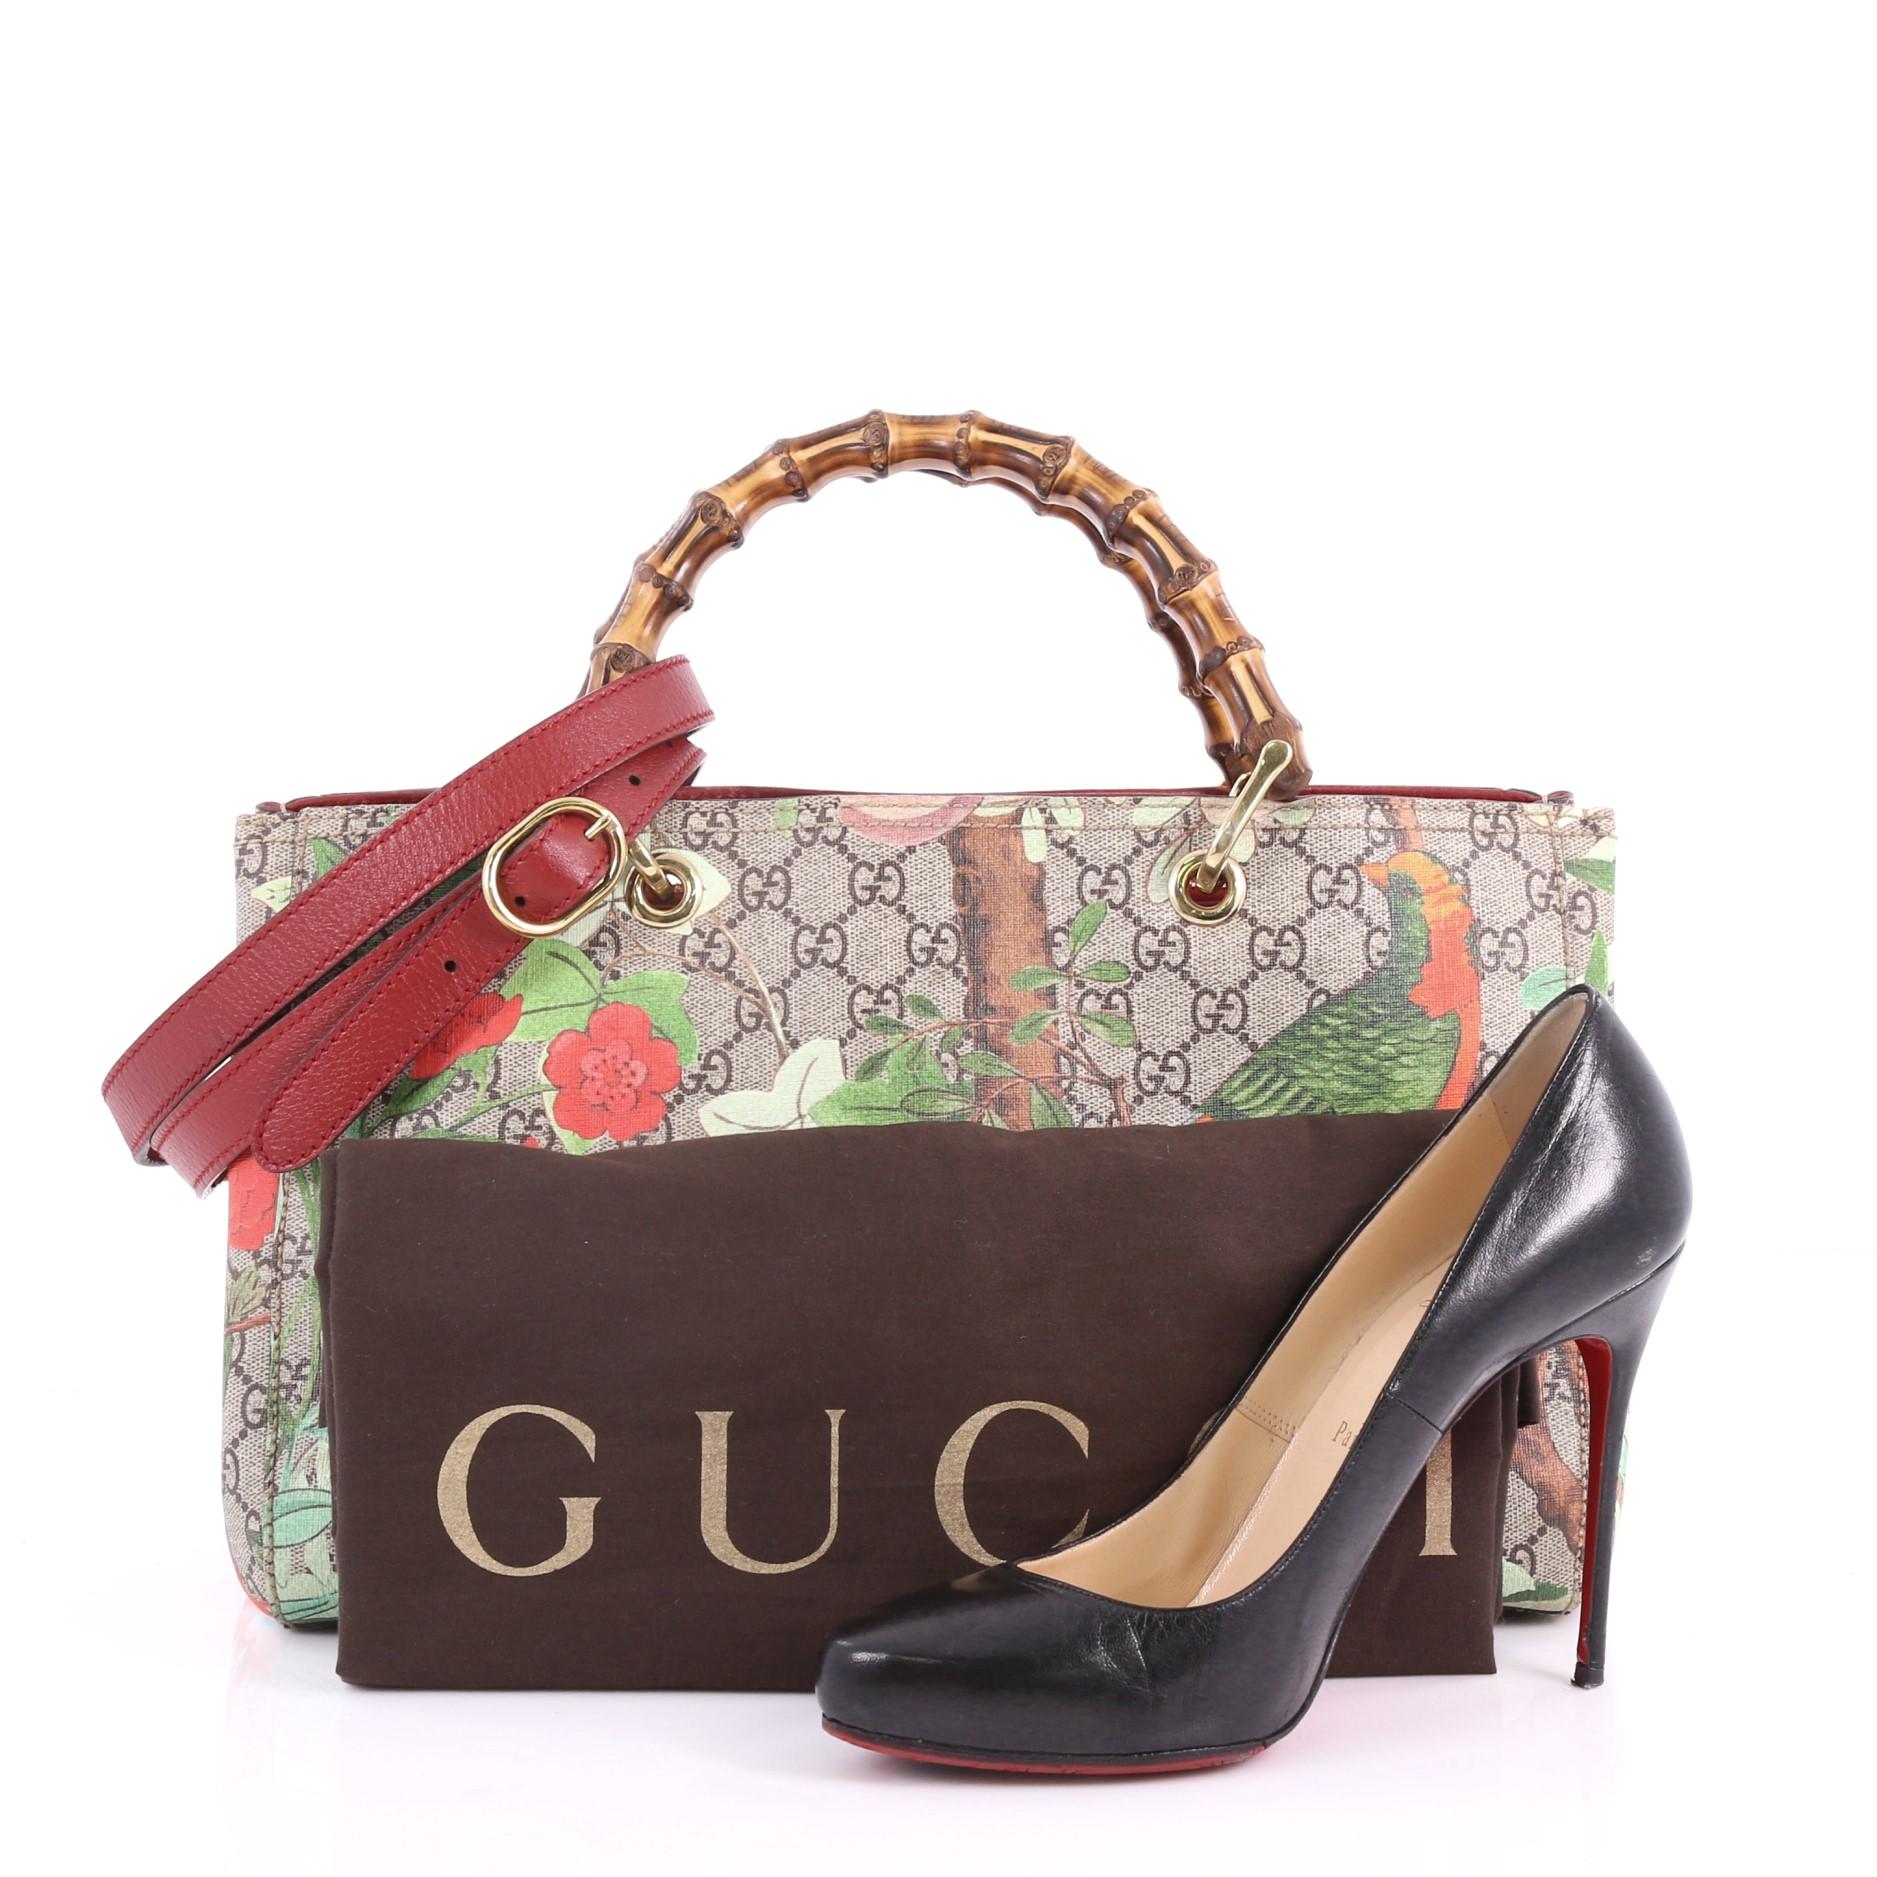 This Gucci Bamboo Shopper Tote Tian Print GG Coated Canvas Medium, crafted from multicolored Tian print GG coated canvas, features sturdy bamboo handles, protective base studs and gold-tone hardware. Its hidden magnetic snap closure opens to a brown